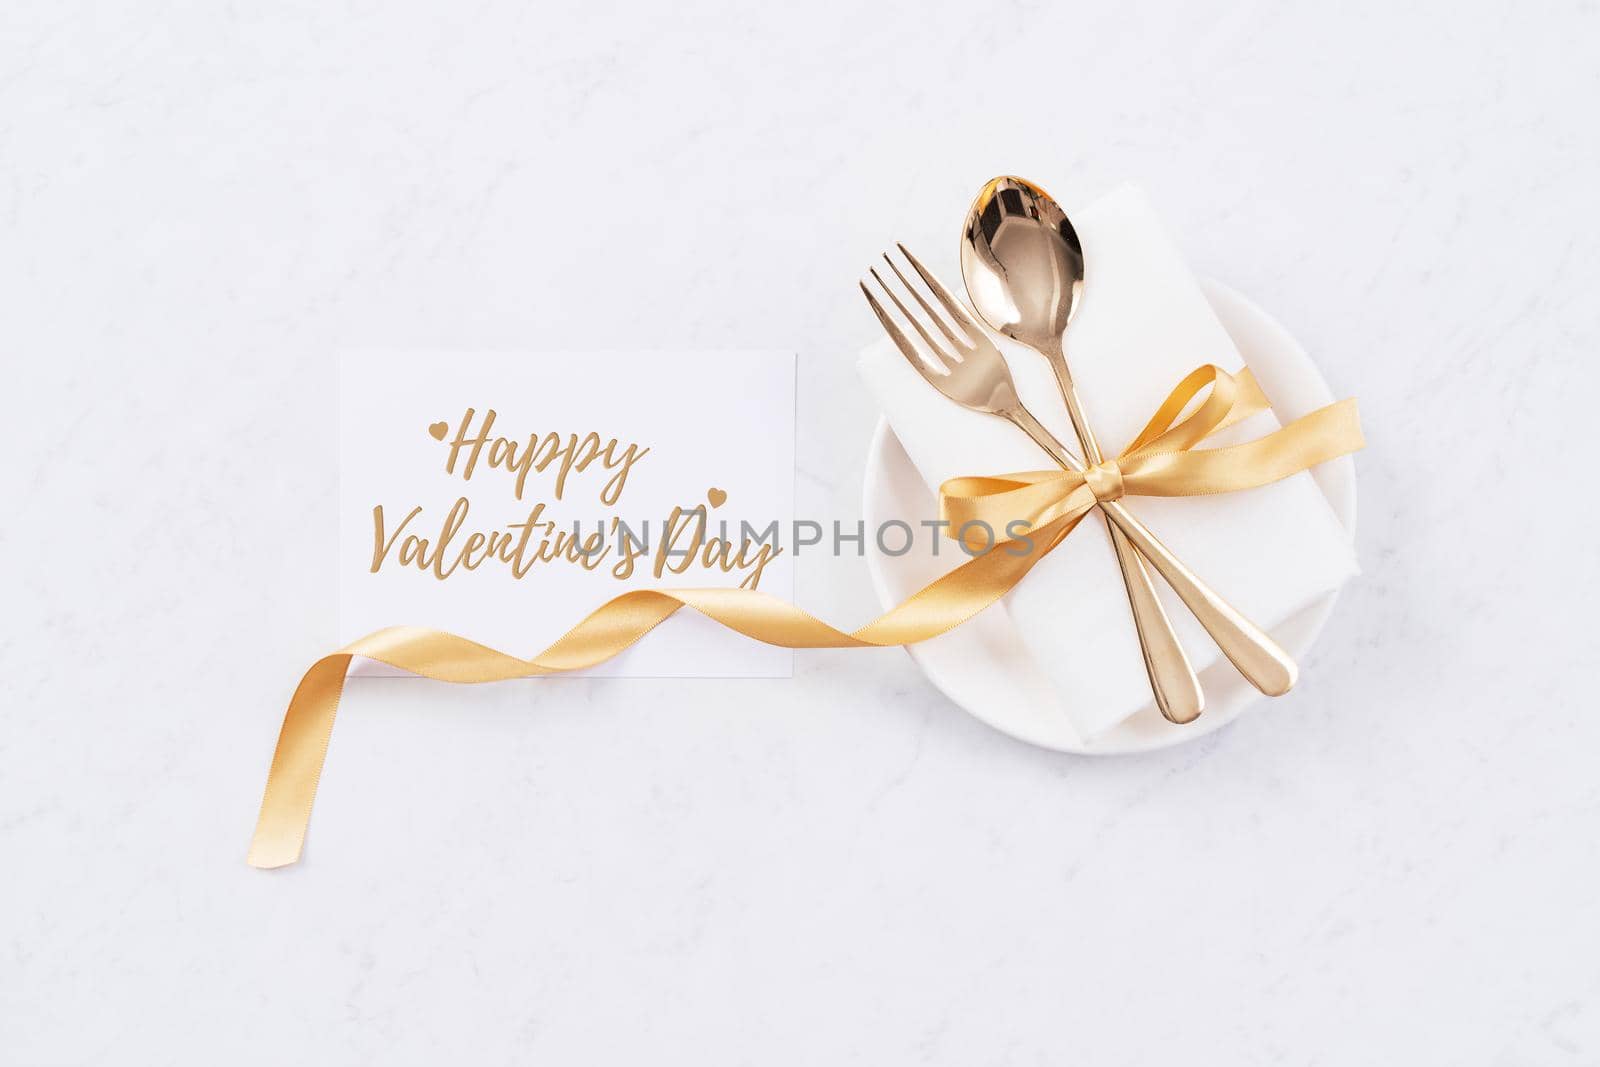 Valentine's Day holiday dating meal, banquet greeting card design concept - White plate and golden color tableware on marble background, top view, flat lay. by ROMIXIMAGE